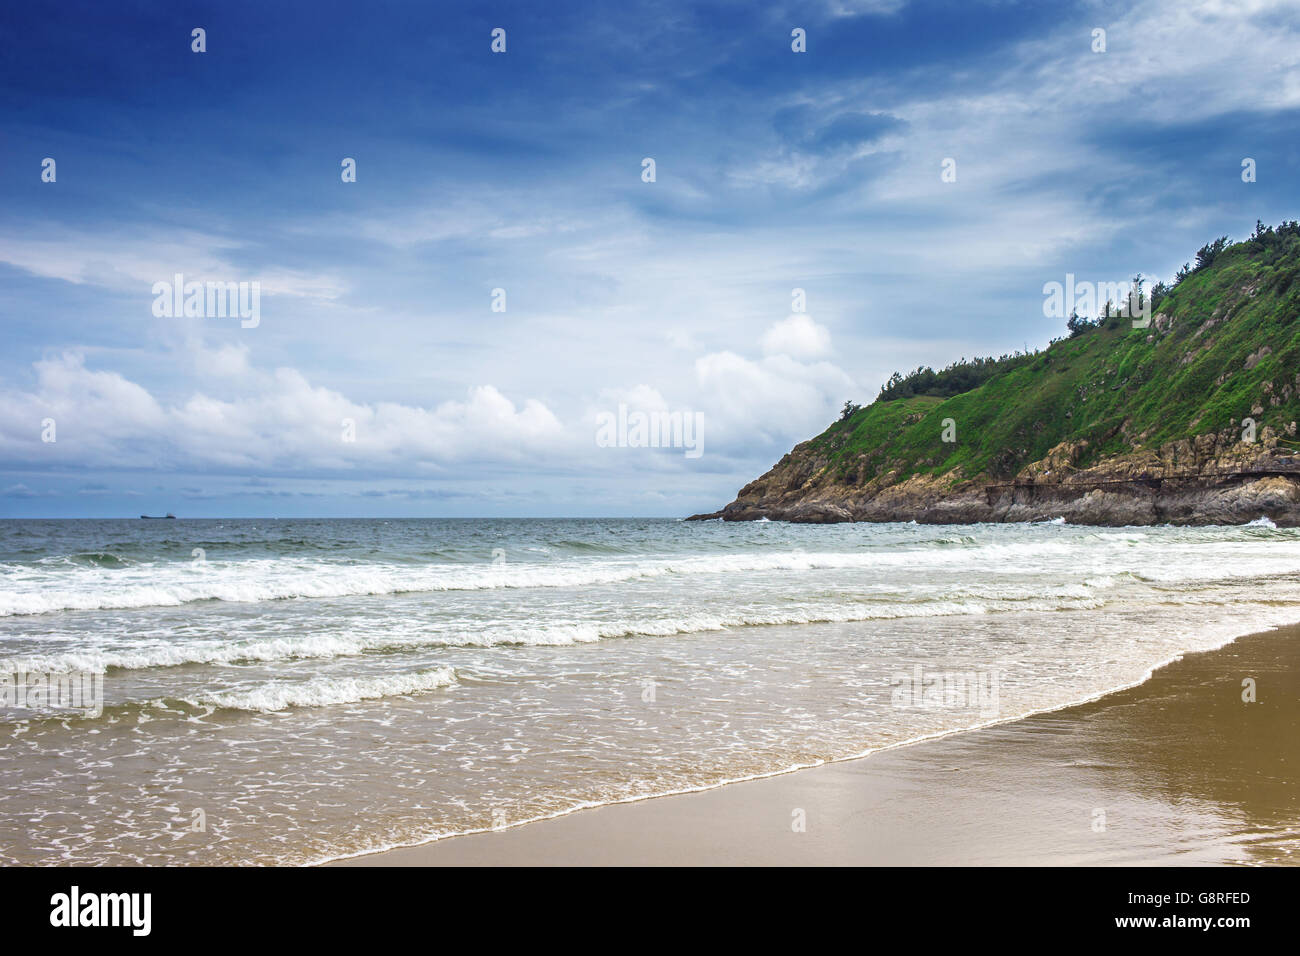 The natural scenery of the sea beach Stock Photo